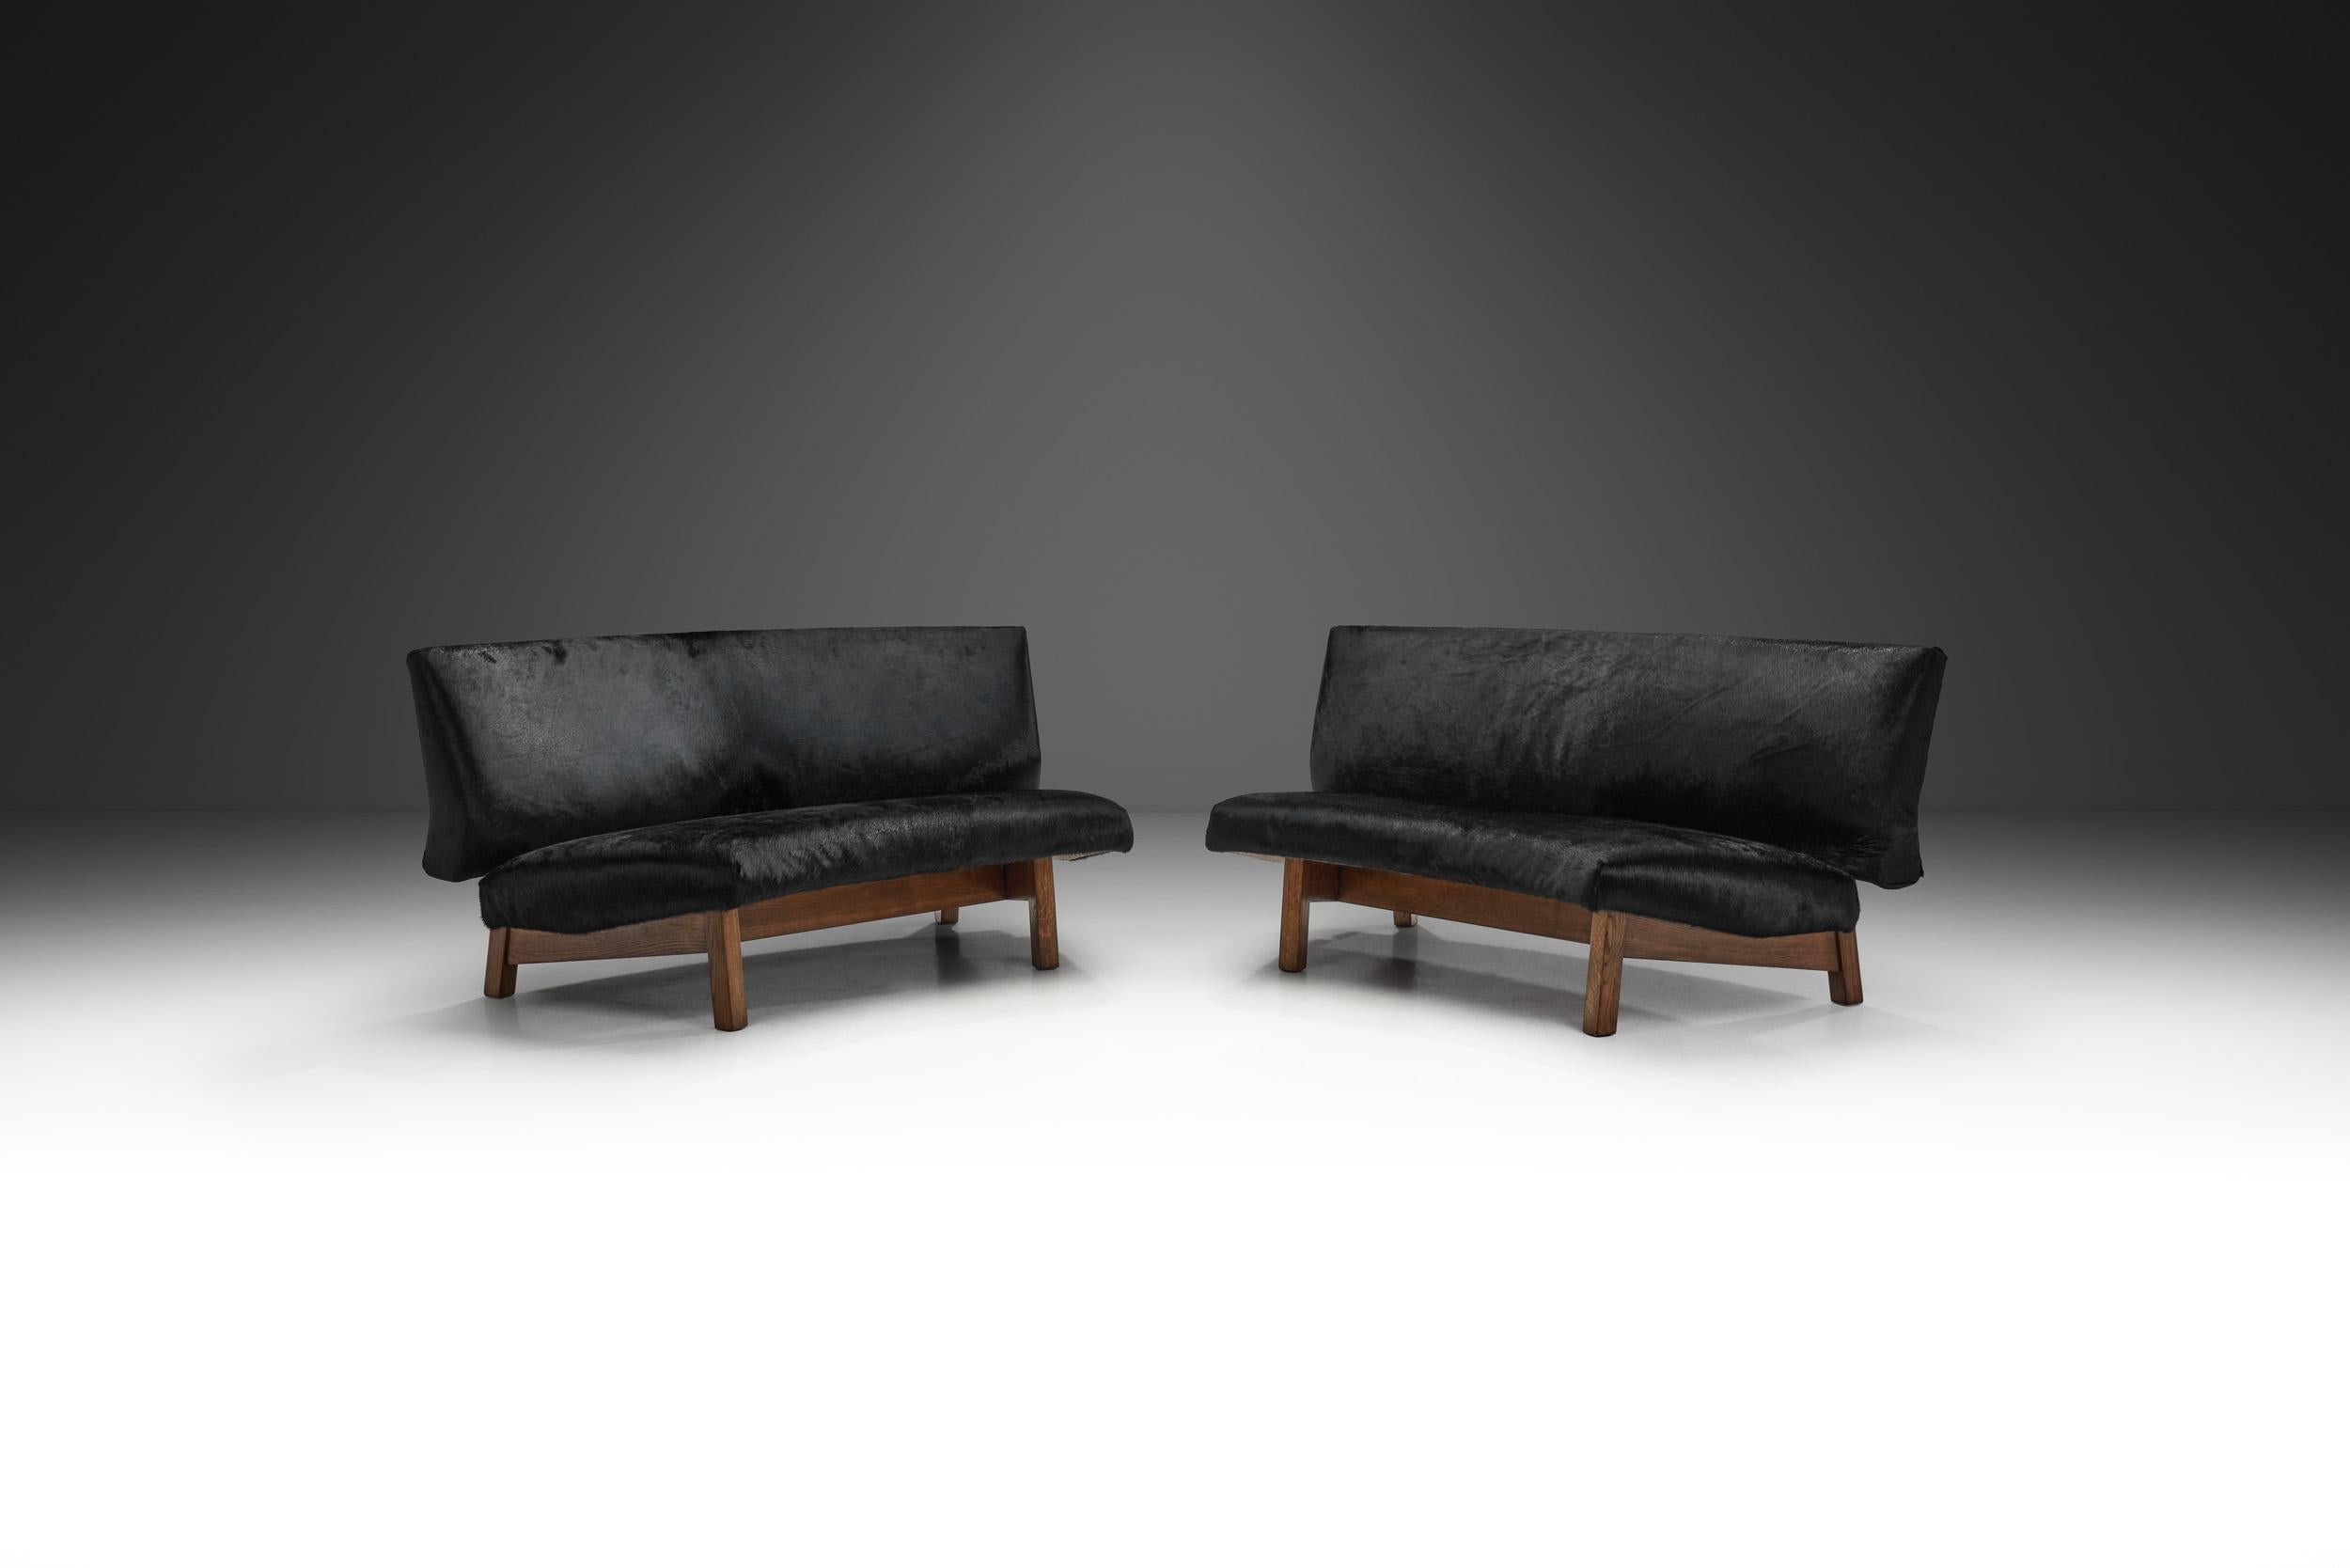 This unique curved sofa consists of two parts and whether the parts are standing next to each other or together, the design is simple and striking.

The two separate part construction allows for significant versatility; the sofas can be placed